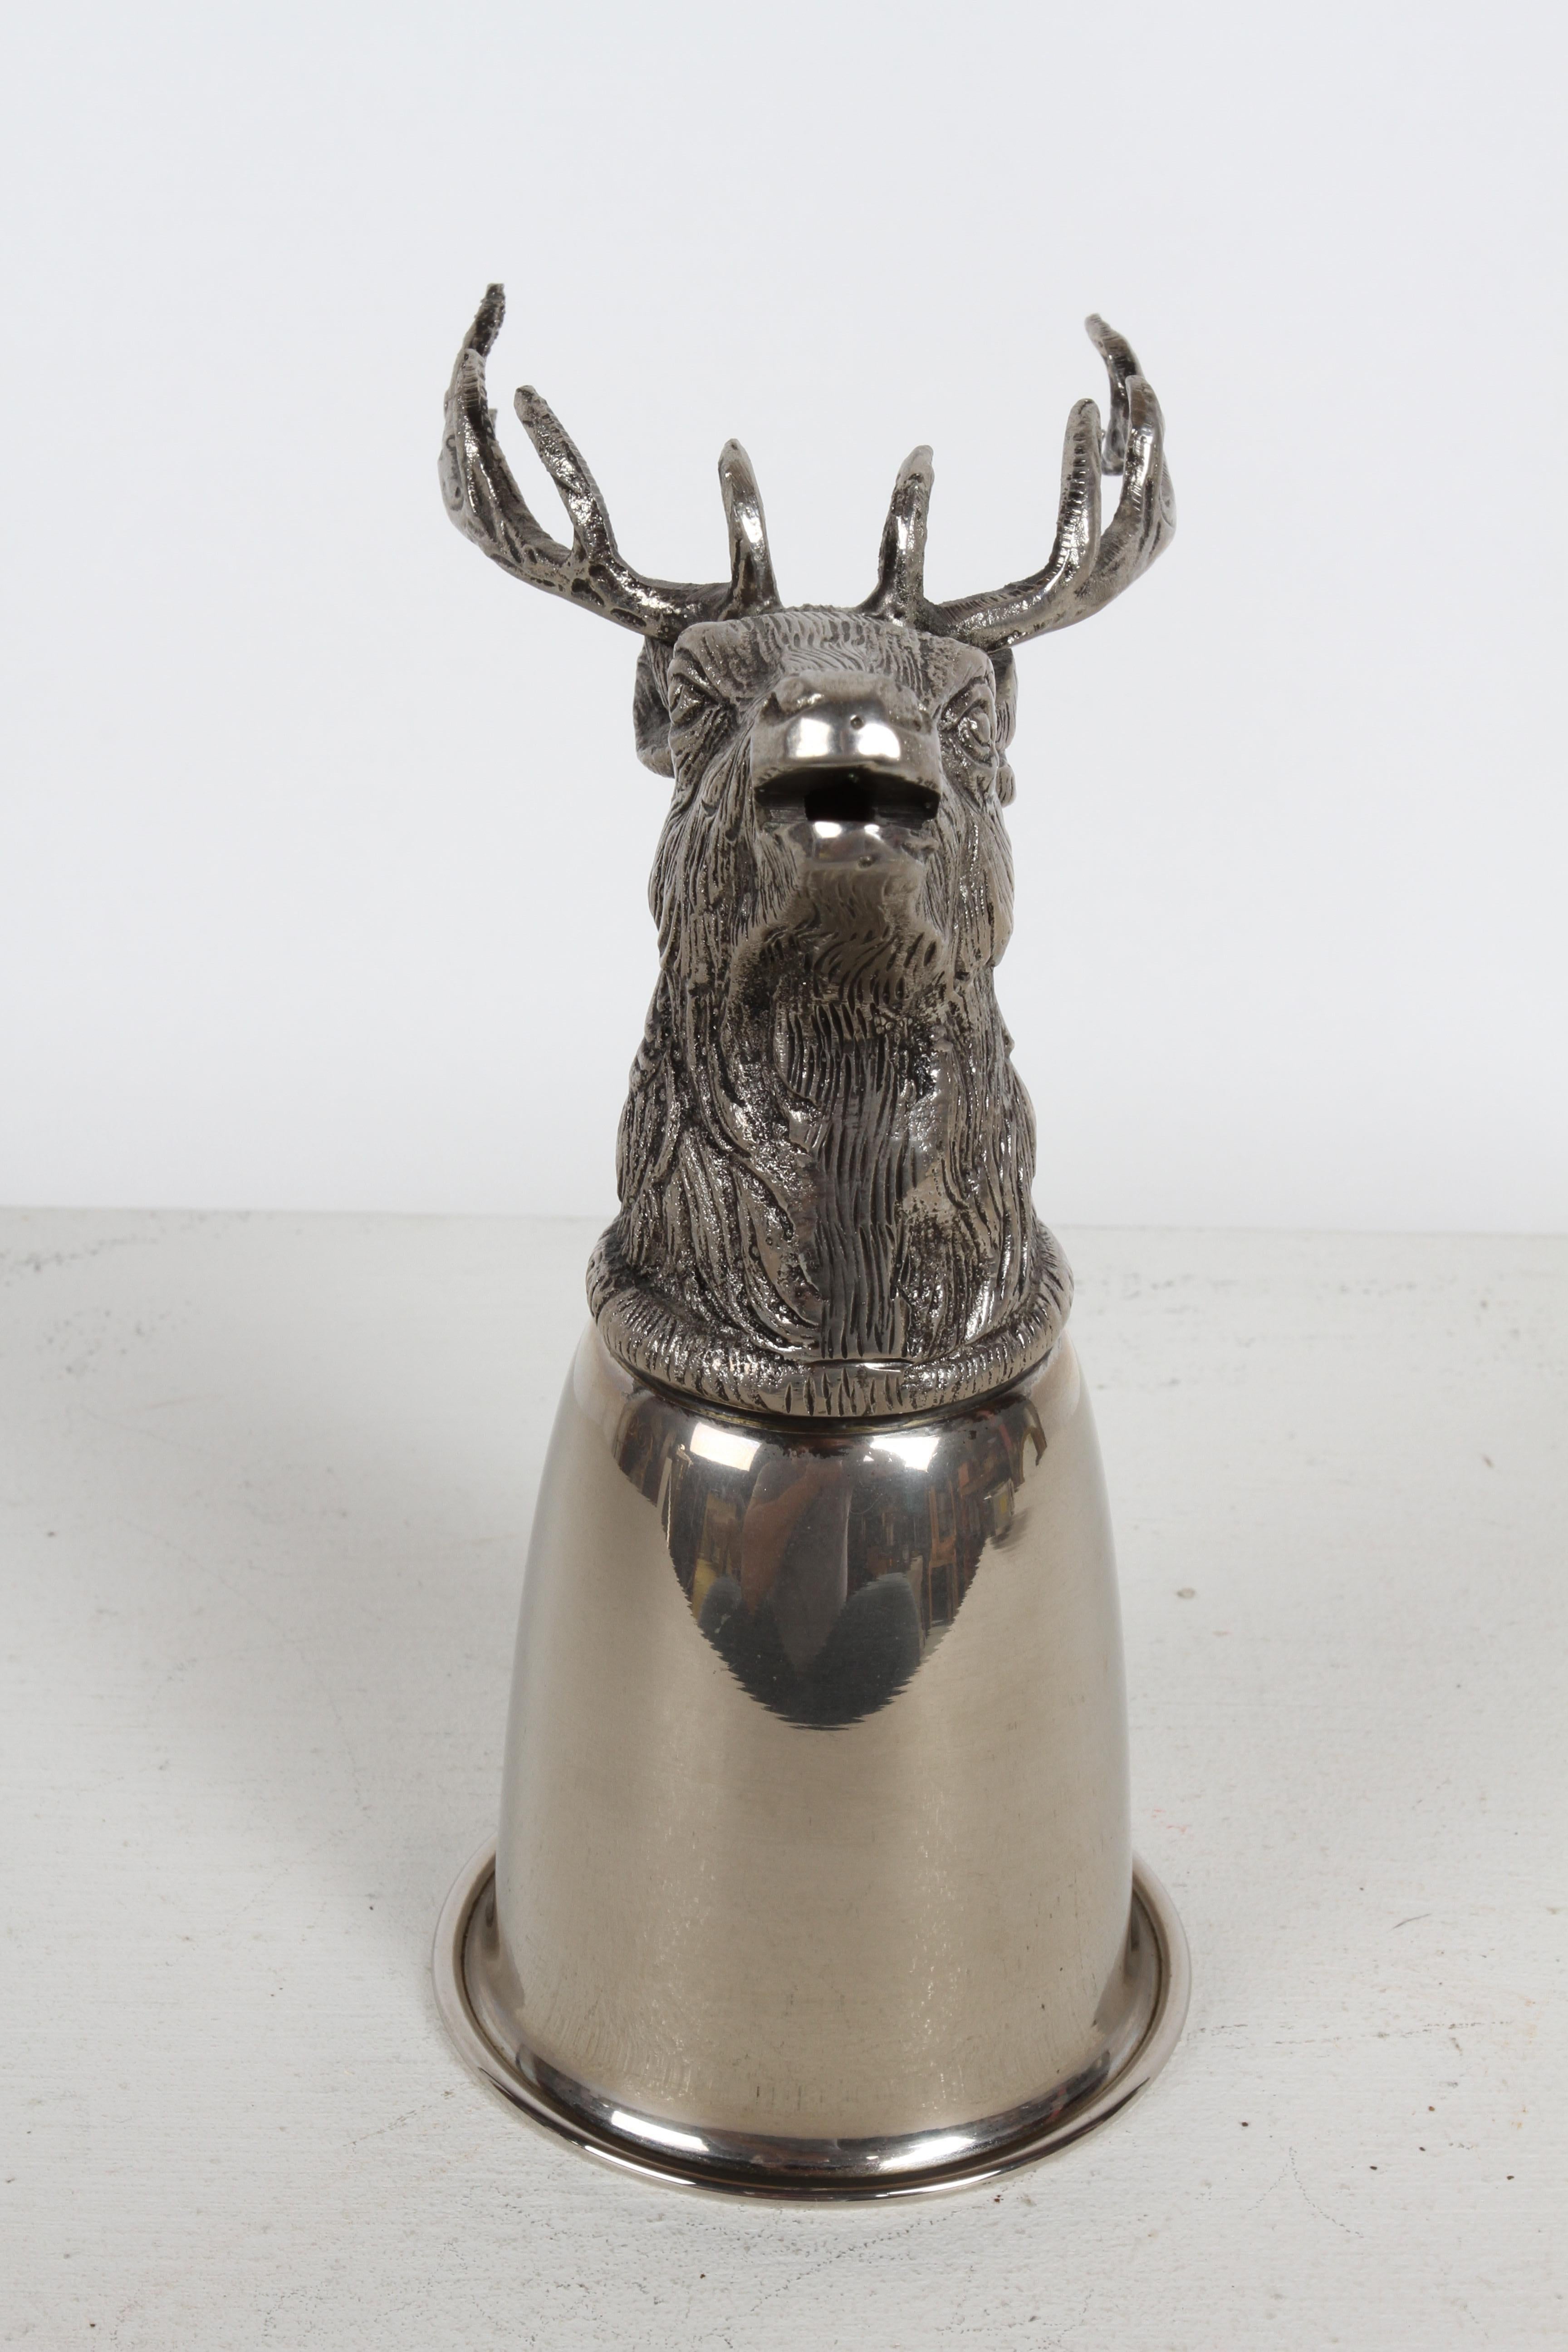 Circa 1970s Hallmarked Gucci - Italy Silver-Plated Elk Head hunting equestrian theme stirrup cup. 
This drinking / vessel cup can rest on the head or be displayed turned over with the head clearly visible, as a trophy / sculpture piece on your bar.